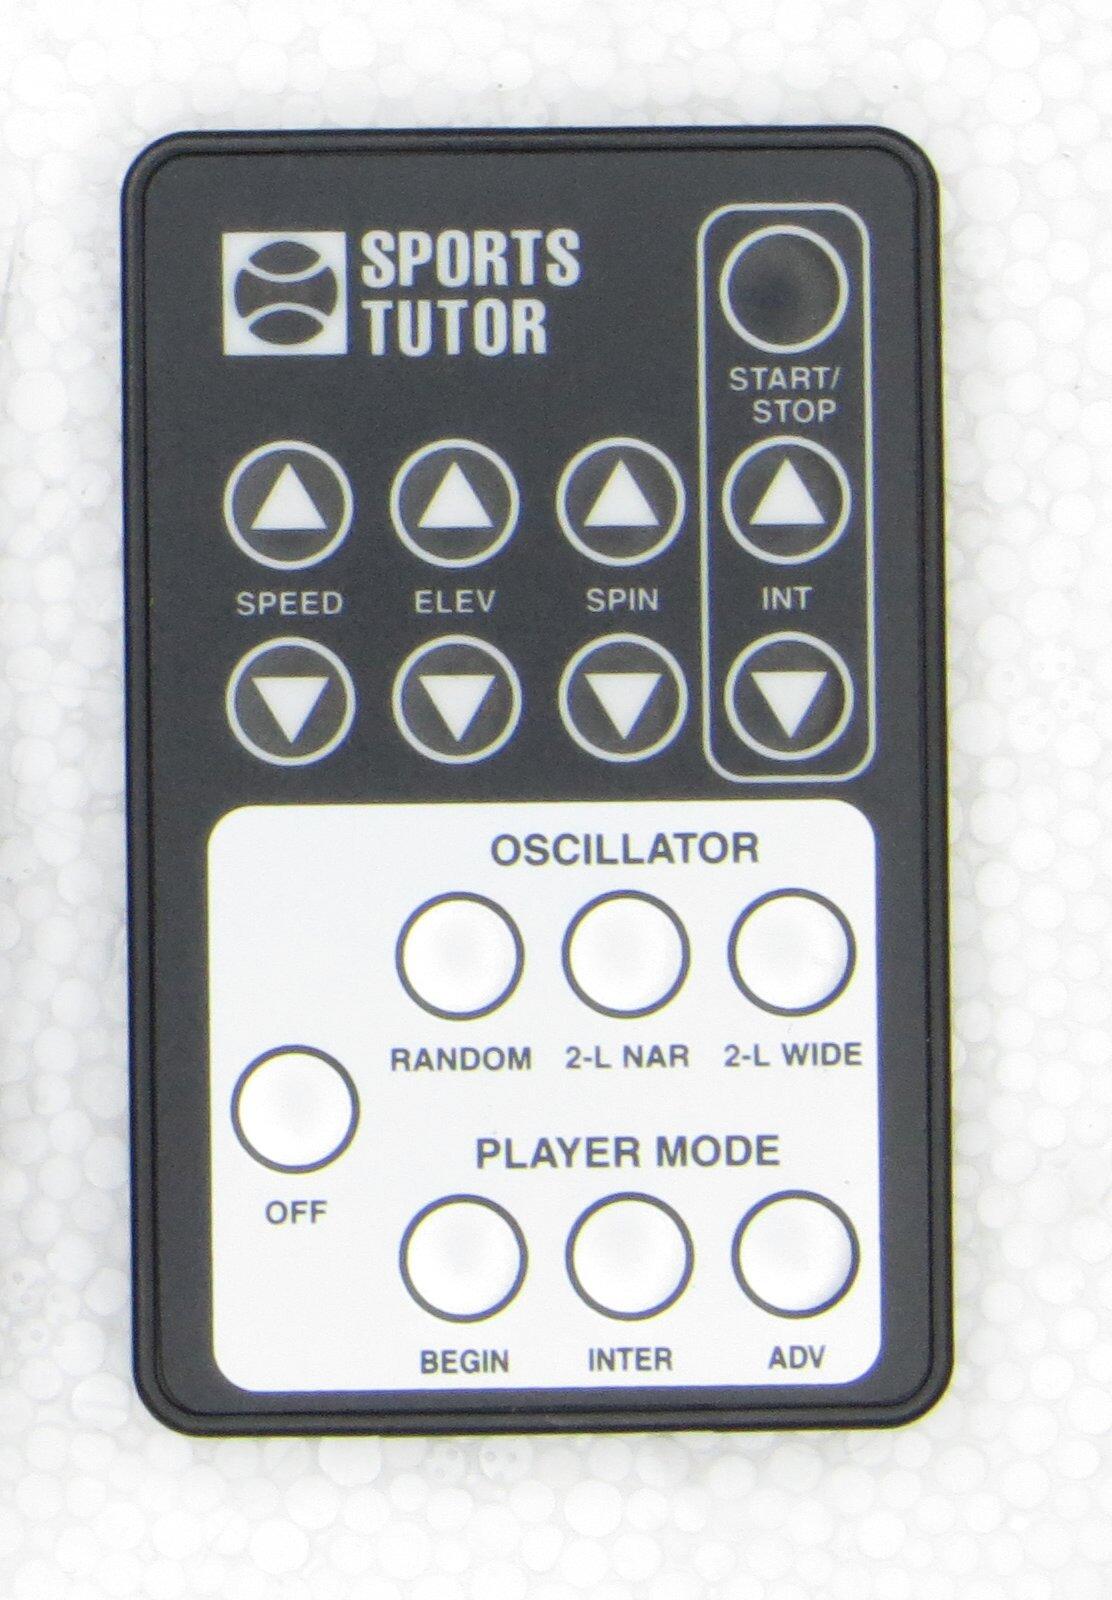 Sports Tutor Multi-function remote control kit for Player Model machines